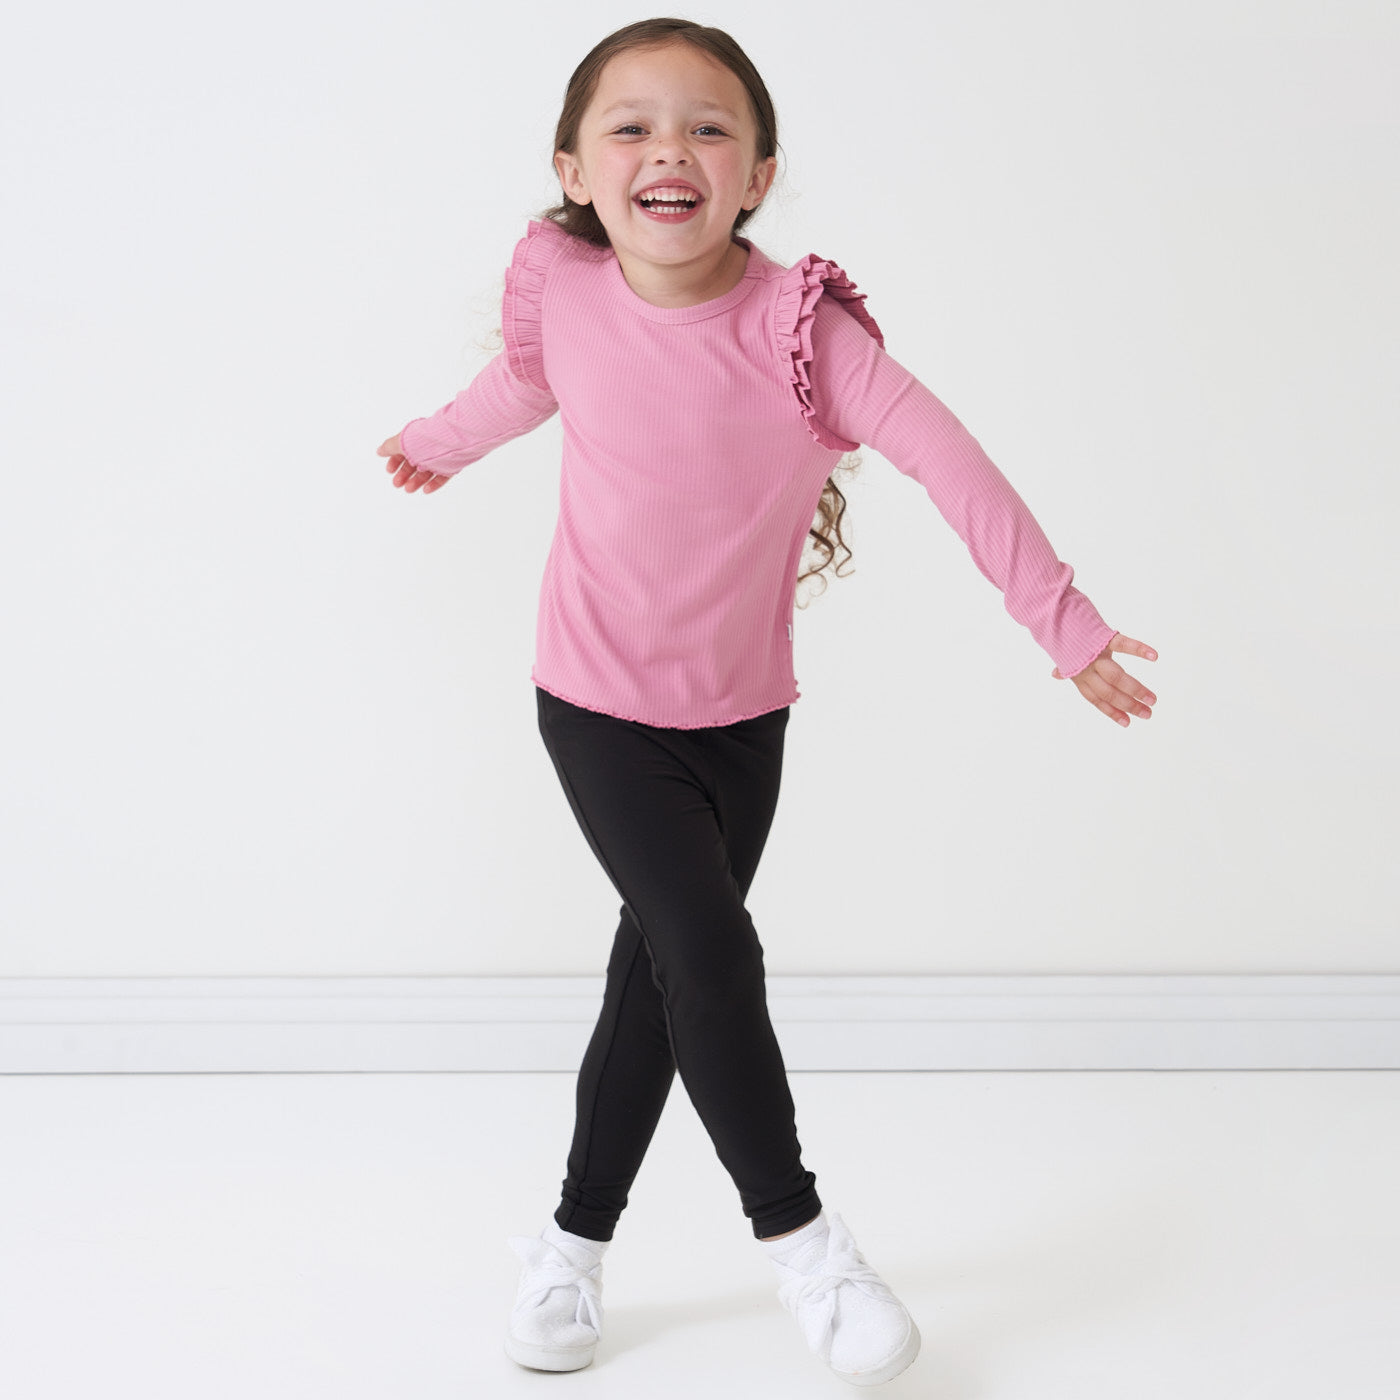 Child wearing Black cozy leggings and a coordinating Garden Rose flutter lettuce tee